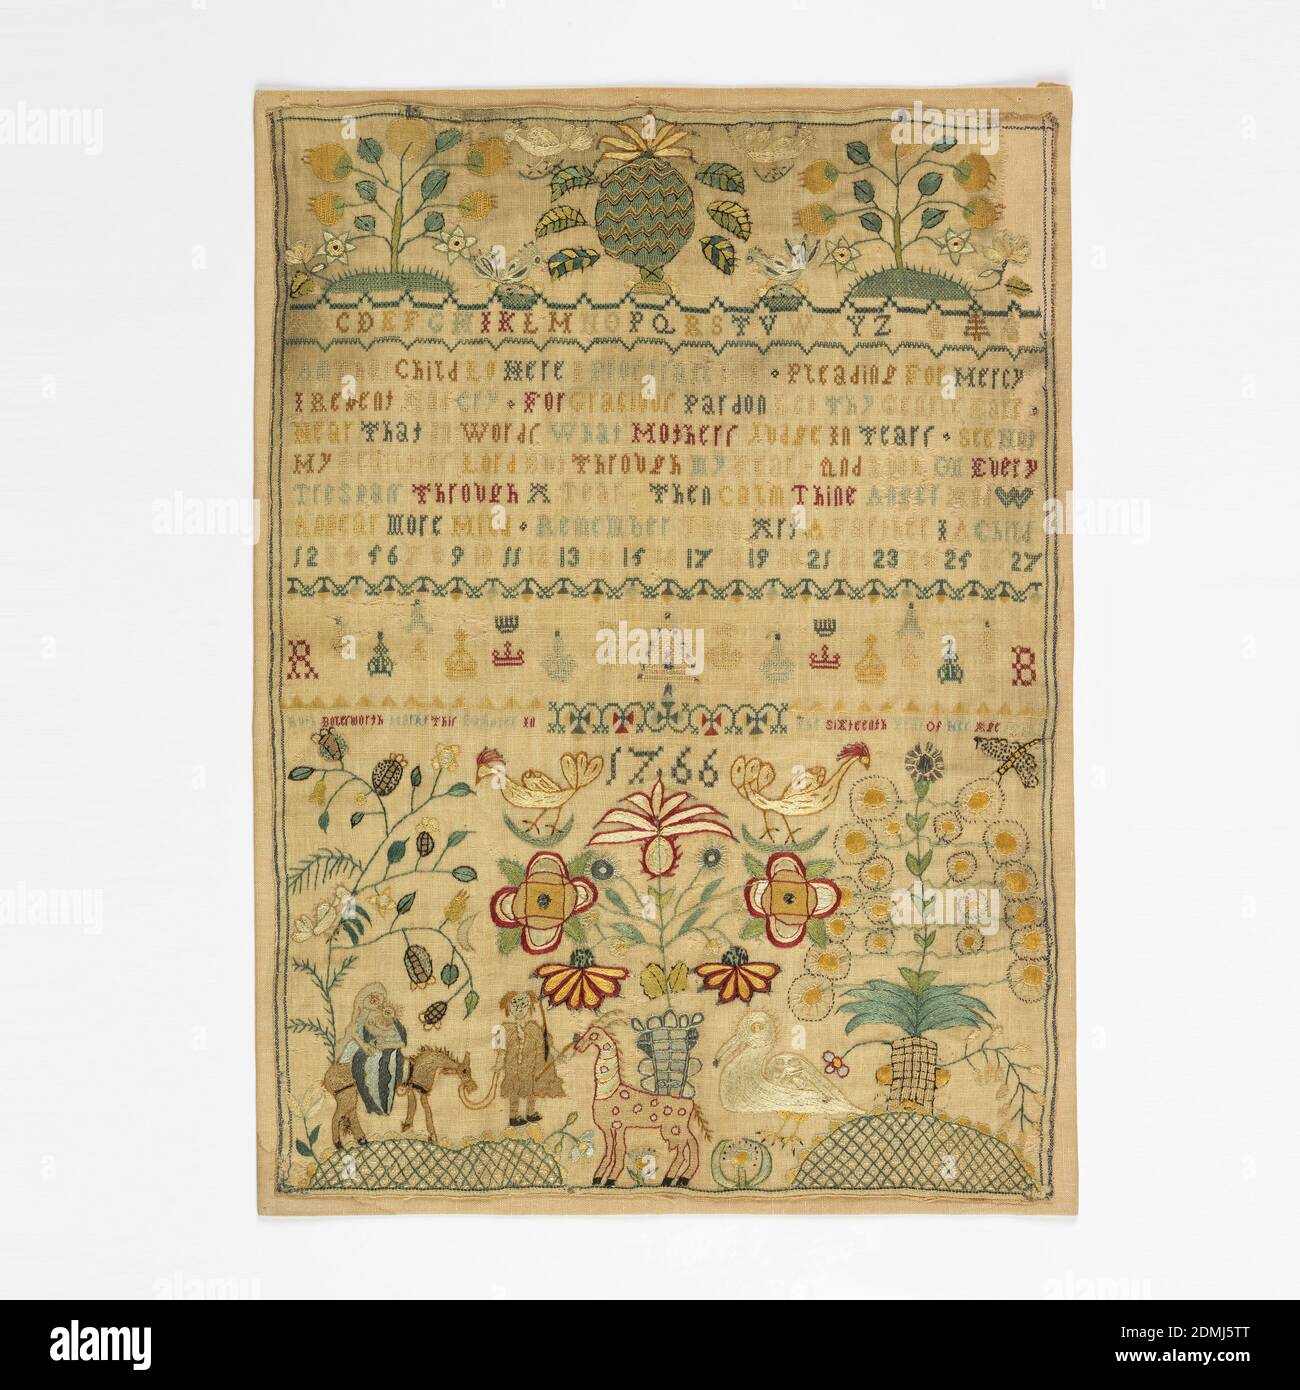 Sampler, Ruth Bolerworth, Medium: silk and metal thread embroidery, wool foundation Technique: cross, tent, satin and stem stitches on plain weave, Alphabets, crowns and verse. Top: Cross borders with trees, flowers, insects, and fruit. Bottom: Scene of the Flight into Egypt with motifs and signature 'Elizabeth Bolerworth, aged 15 years.', England, 1766, embroidery & stitching, Sampler Stock Photo